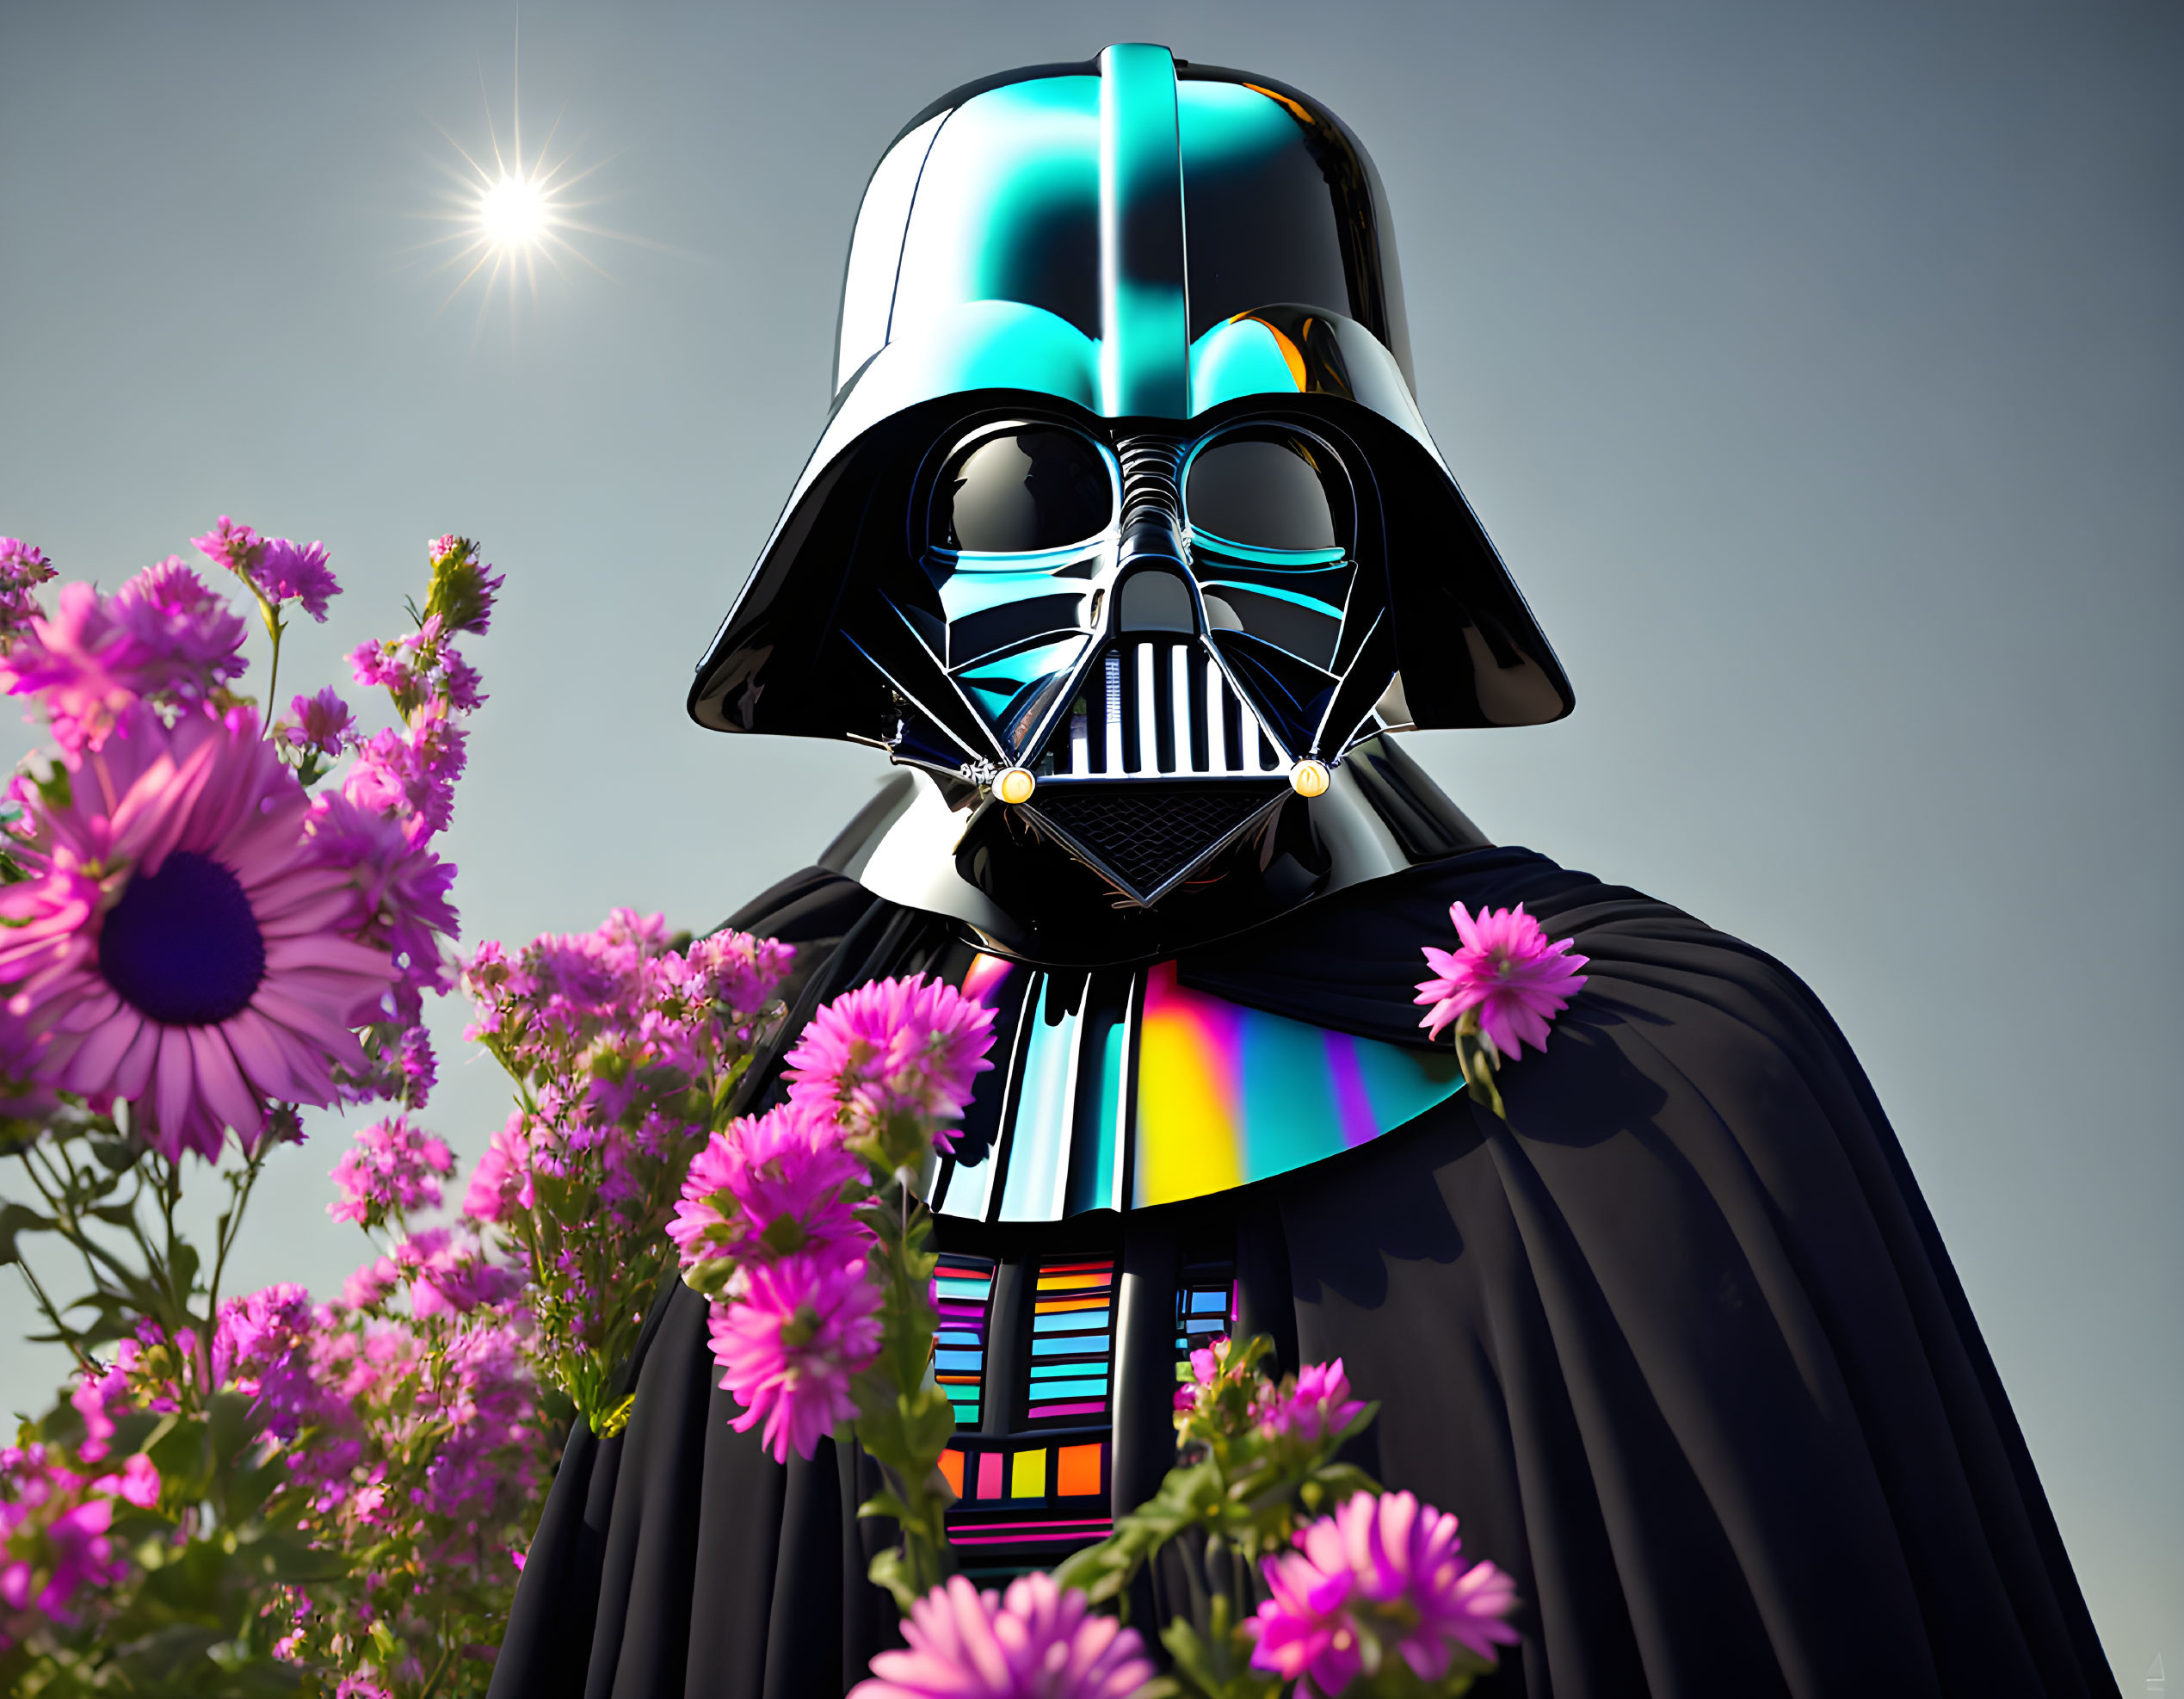 Darth Vader ist tired to be hated by everyone